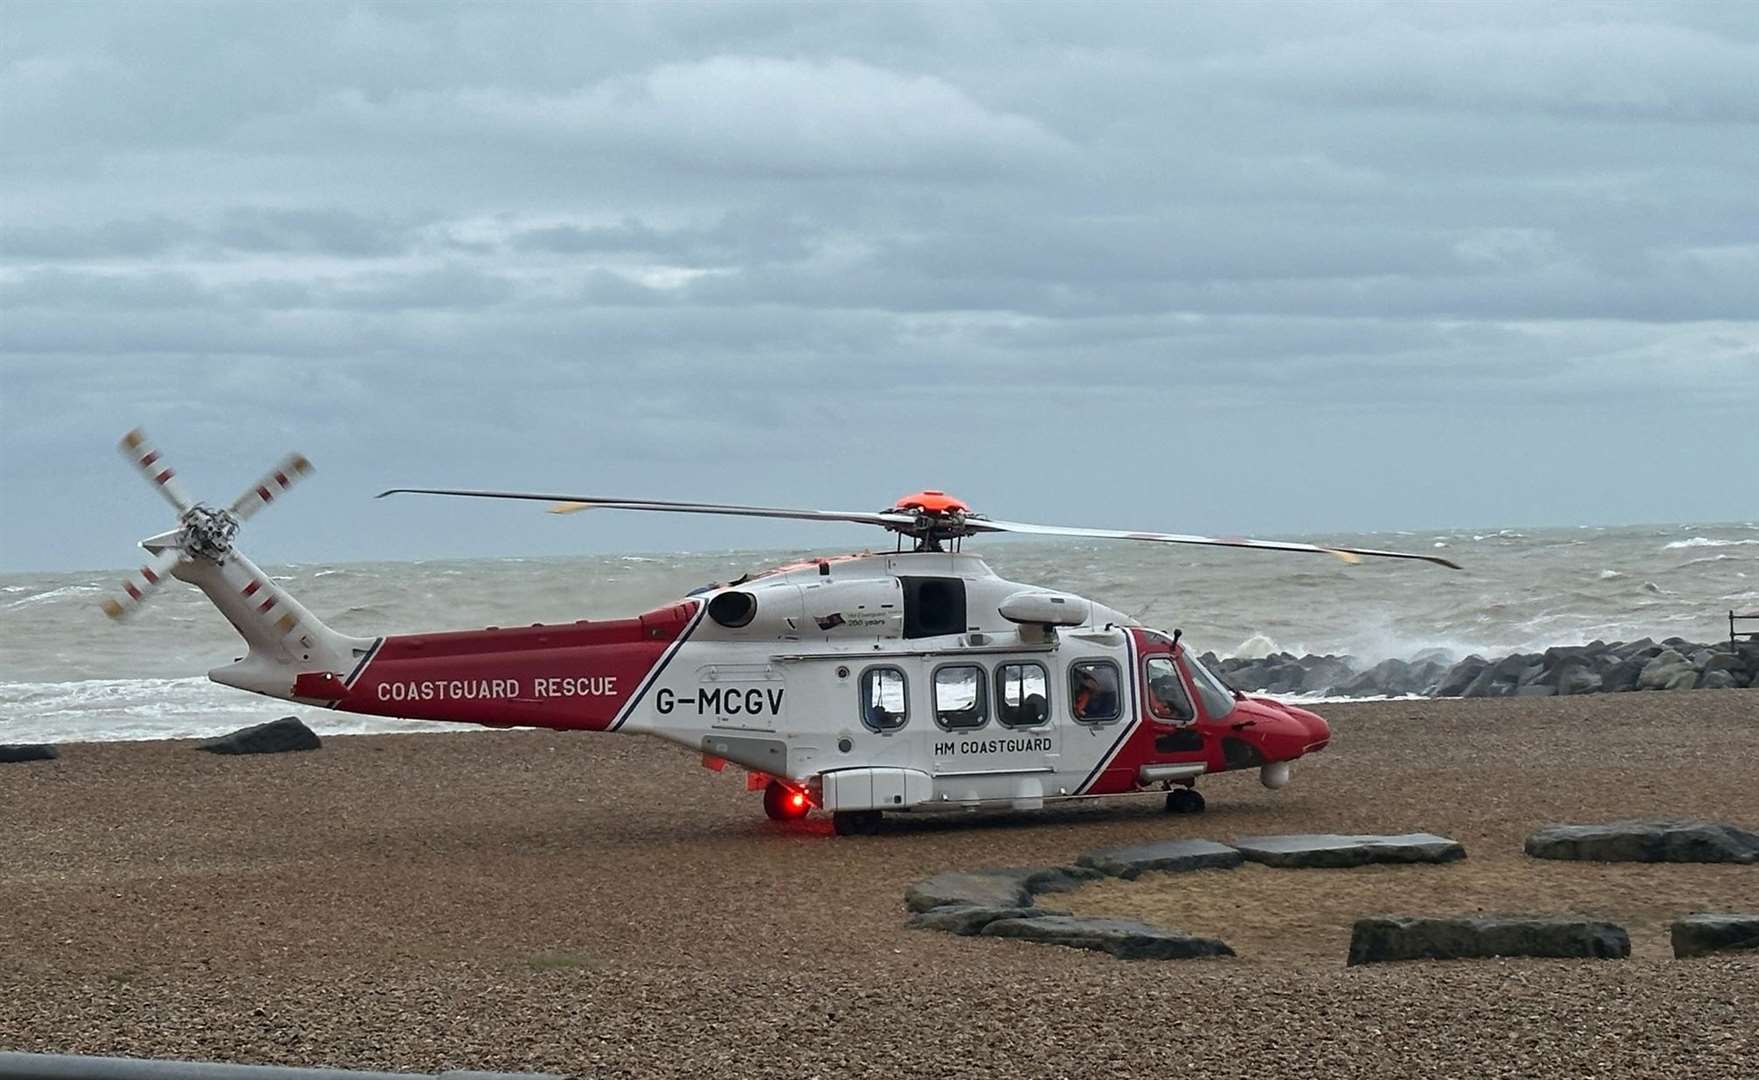 The Coastguard was spotted at Sandgate beach